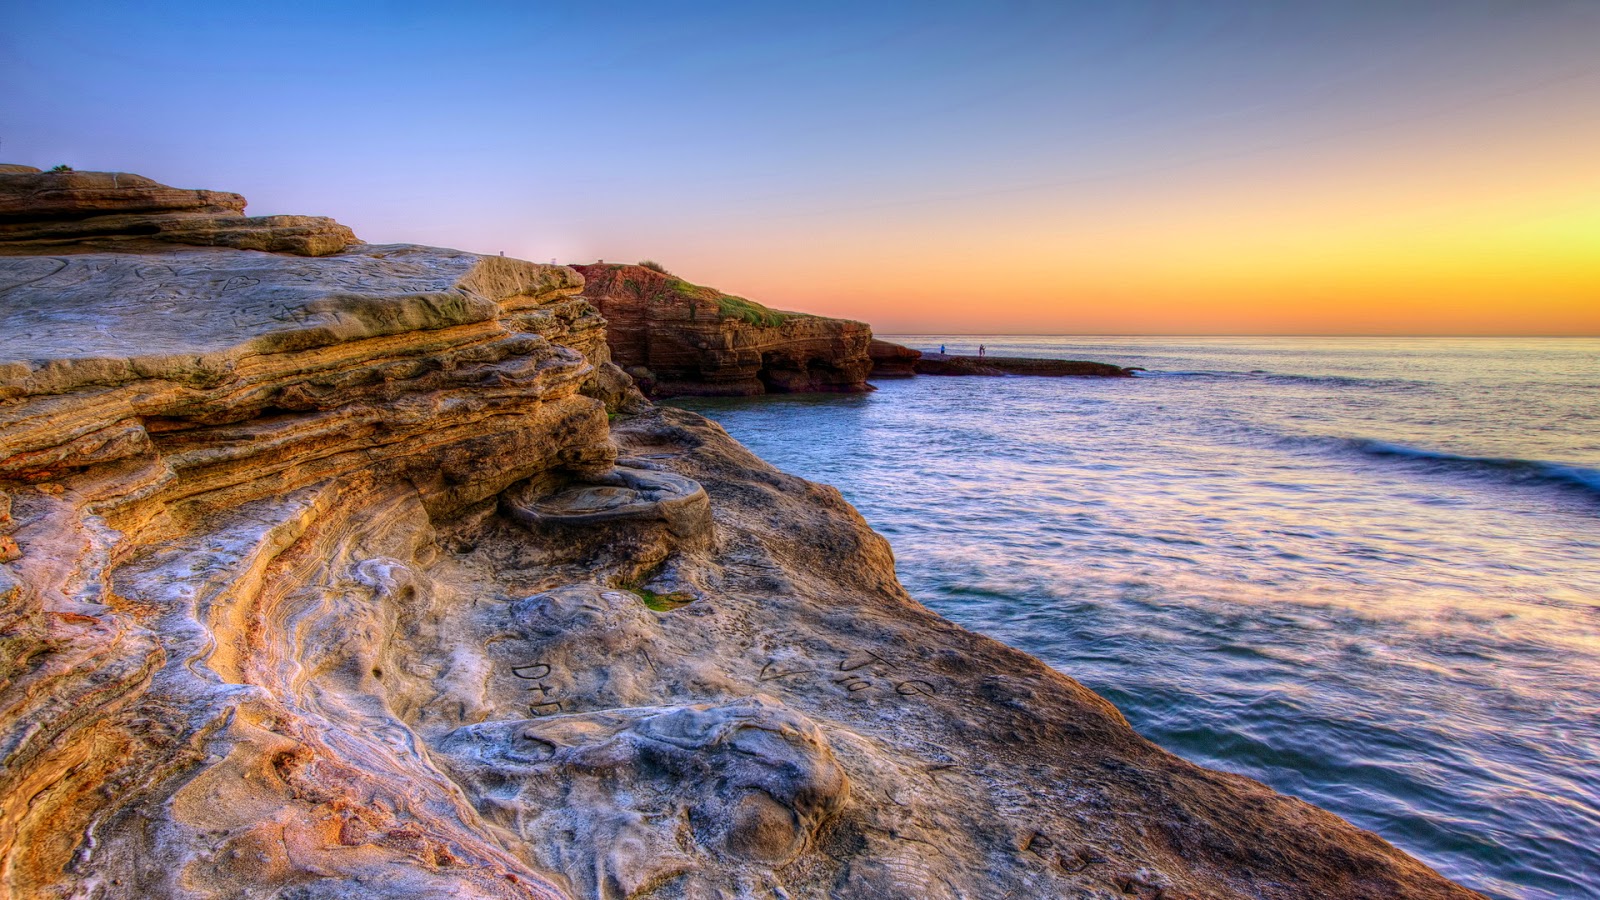  San Diego this is beautiful Rocky beach This wallpaper San Diego is 1600x900